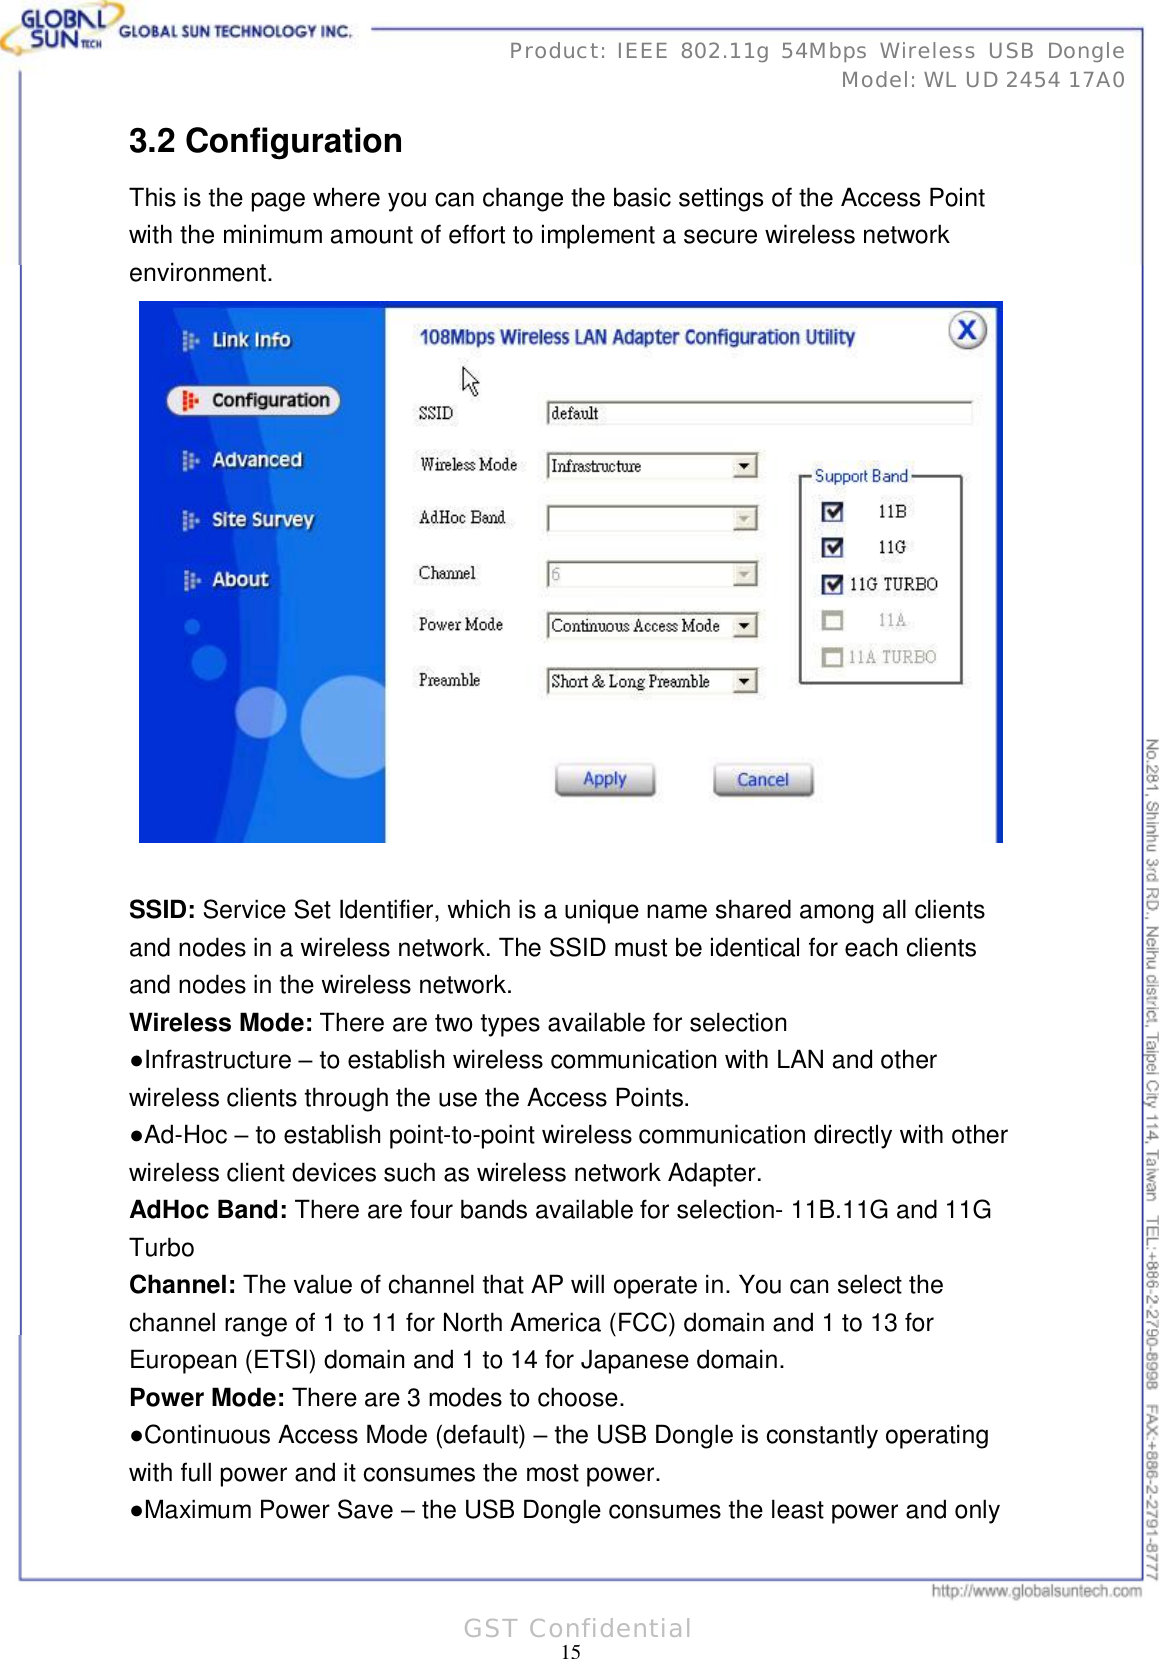      31 15Product: IEEE 802.11g 54Mbps Wireless USB Dongle Model: WL UD 2454 17A0 GST Confidential 3.2 Configuration This is the page where you can change the basic settings of the Access Point with the minimum amount of effort to implement a secure wireless network environment.   SSID: Service Set Identifier, which is a unique name shared among all clients and nodes in a wireless network. The SSID must be identical for each clients and nodes in the wireless network. Wireless Mode: There are two types available for selection ●Infrastructure – to establish wireless communication with LAN and other wireless clients through the use the Access Points. ●Ad-Hoc – to establish point-to-point wireless communication directly with other wireless client devices such as wireless network Adapter. AdHoc Band: There are four bands available for selection- 11B.11G and 11G Turbo Channel: The value of channel that AP will operate in. You can select the channel range of 1 to 11 for North America (FCC) domain and 1 to 13 for European (ETSI) domain and 1 to 14 for Japanese domain. Power Mode: There are 3 modes to choose. ●Continuous Access Mode (default) – the USB Dongle is constantly operating with full power and it consumes the most power. ●Maximum Power Save – the USB Dongle consumes the least power and only 